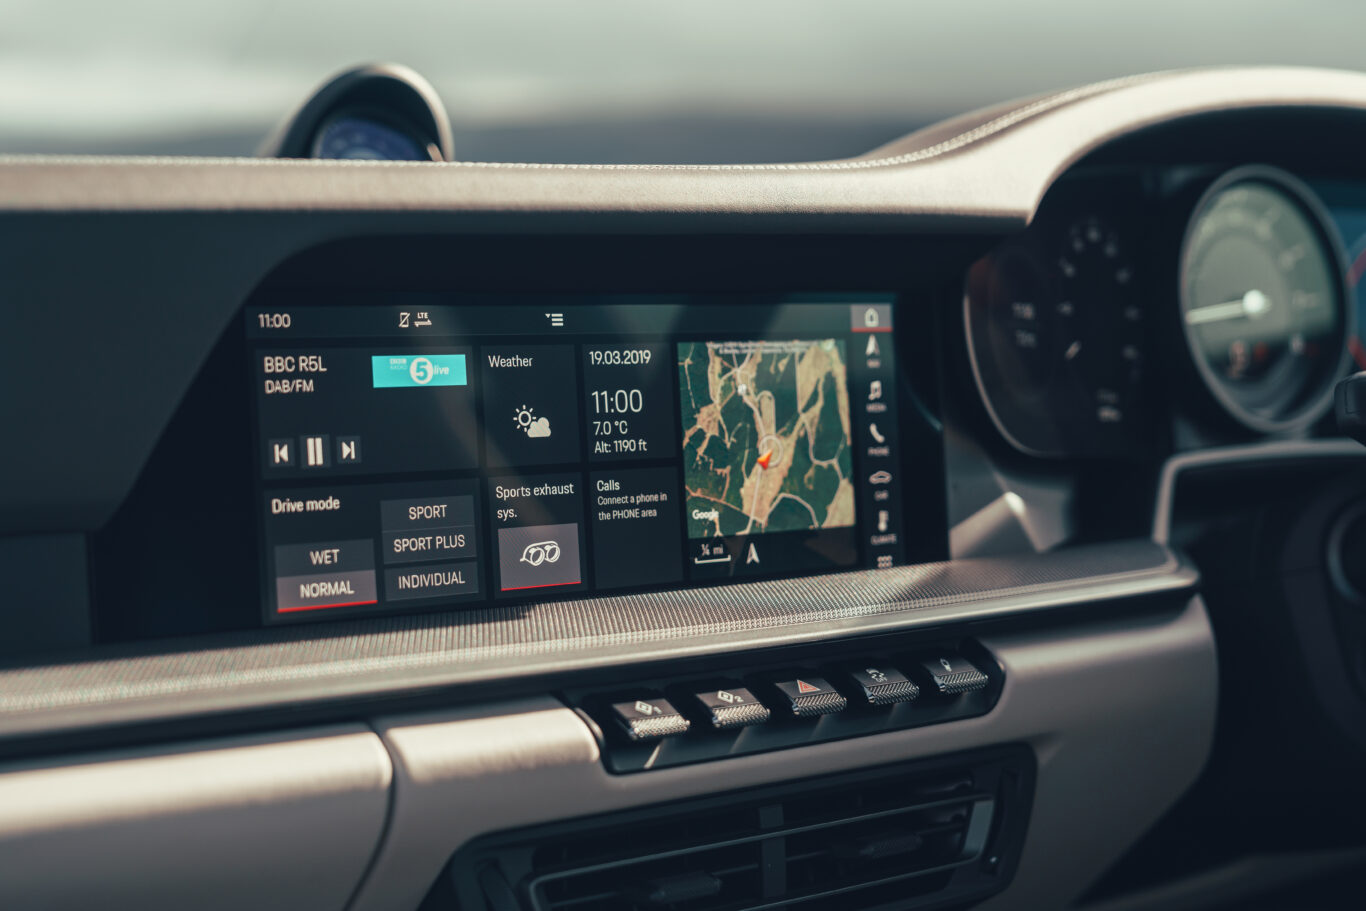 A new infotainment system is easy and simple to use